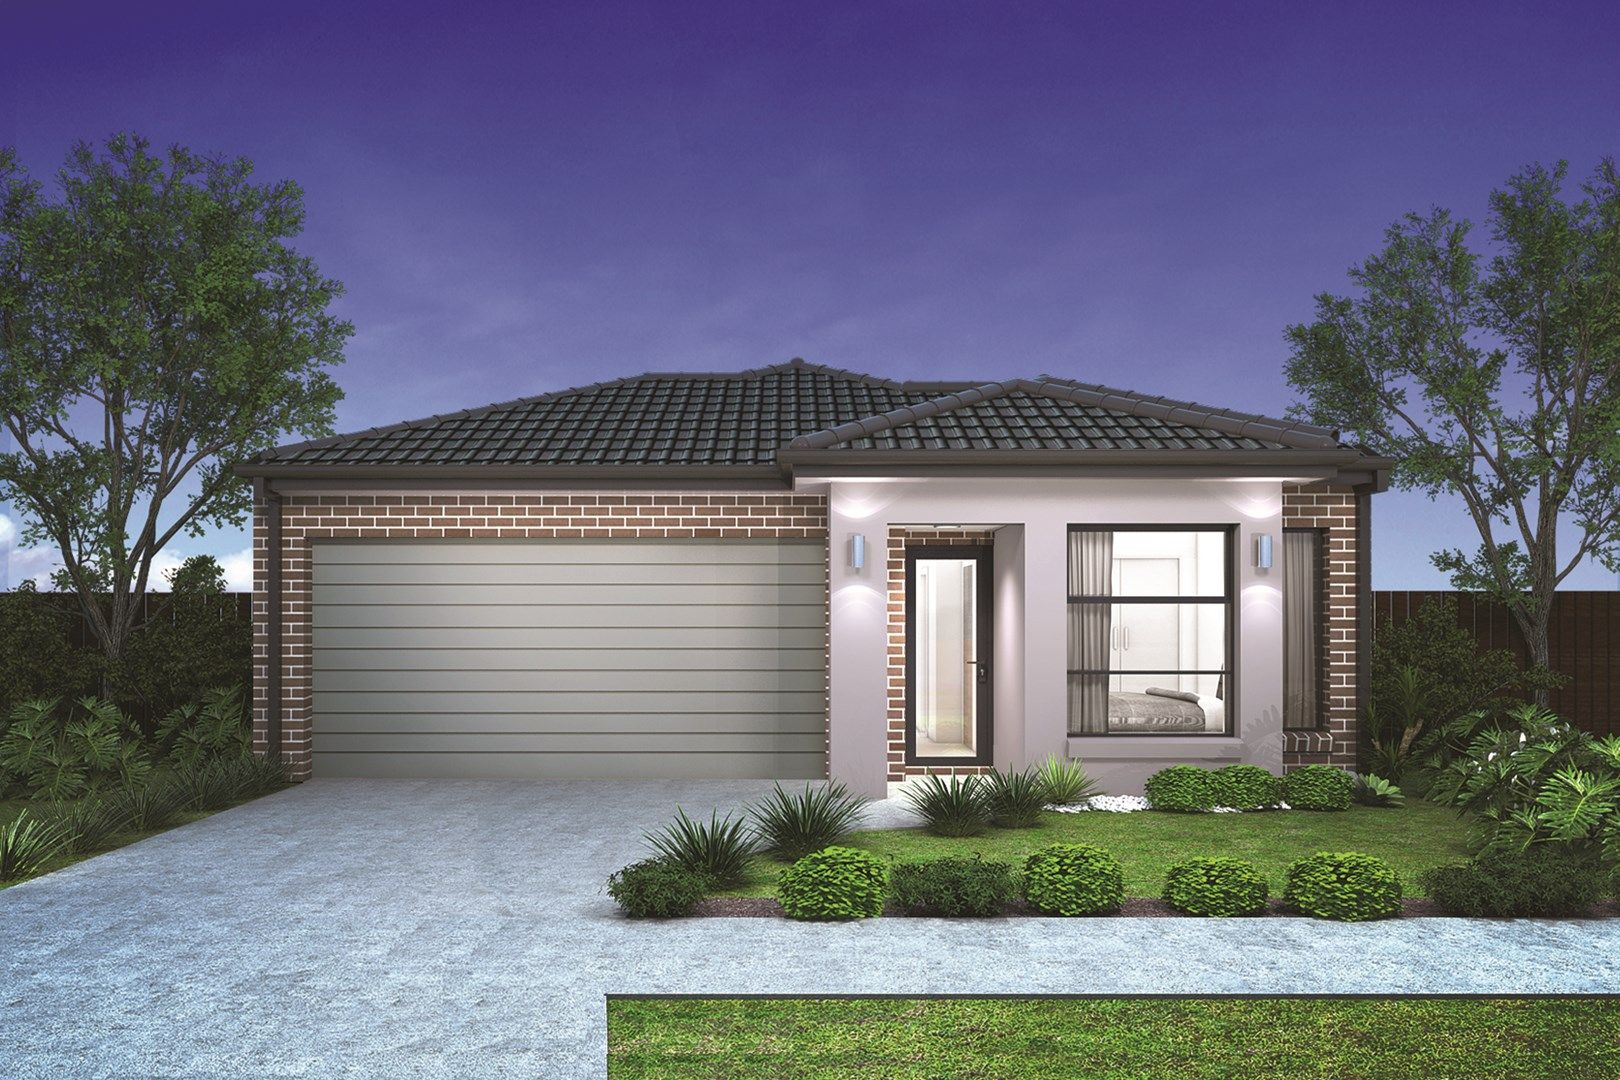 3 bedrooms New House & Land in LOT 566 TAYLORS RUN (LAND TITLE Q4 2022) FRASER RISE VIC, 3336